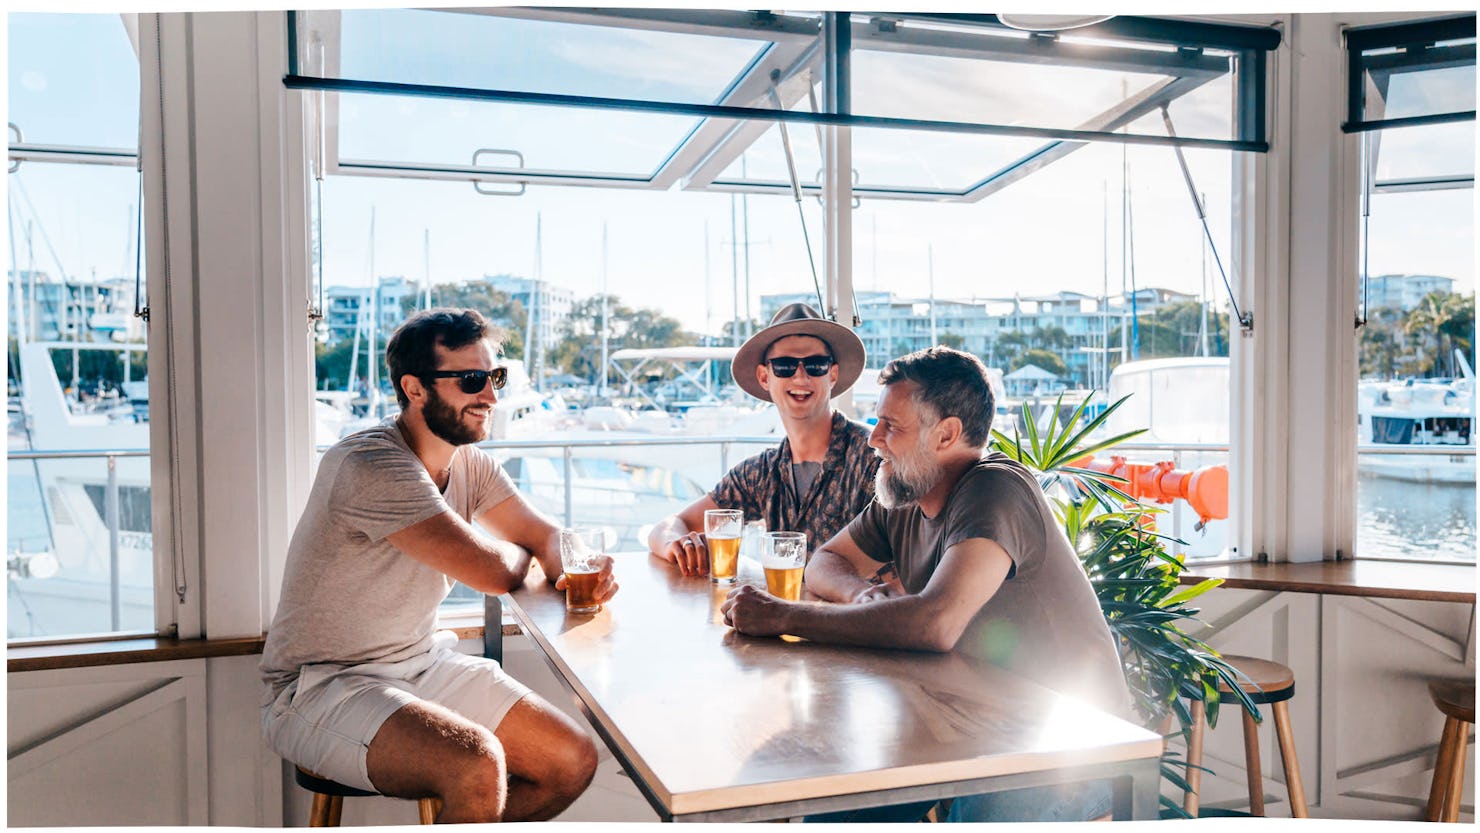 7 absolute best restaurants and bars in Caloundra and Kawana